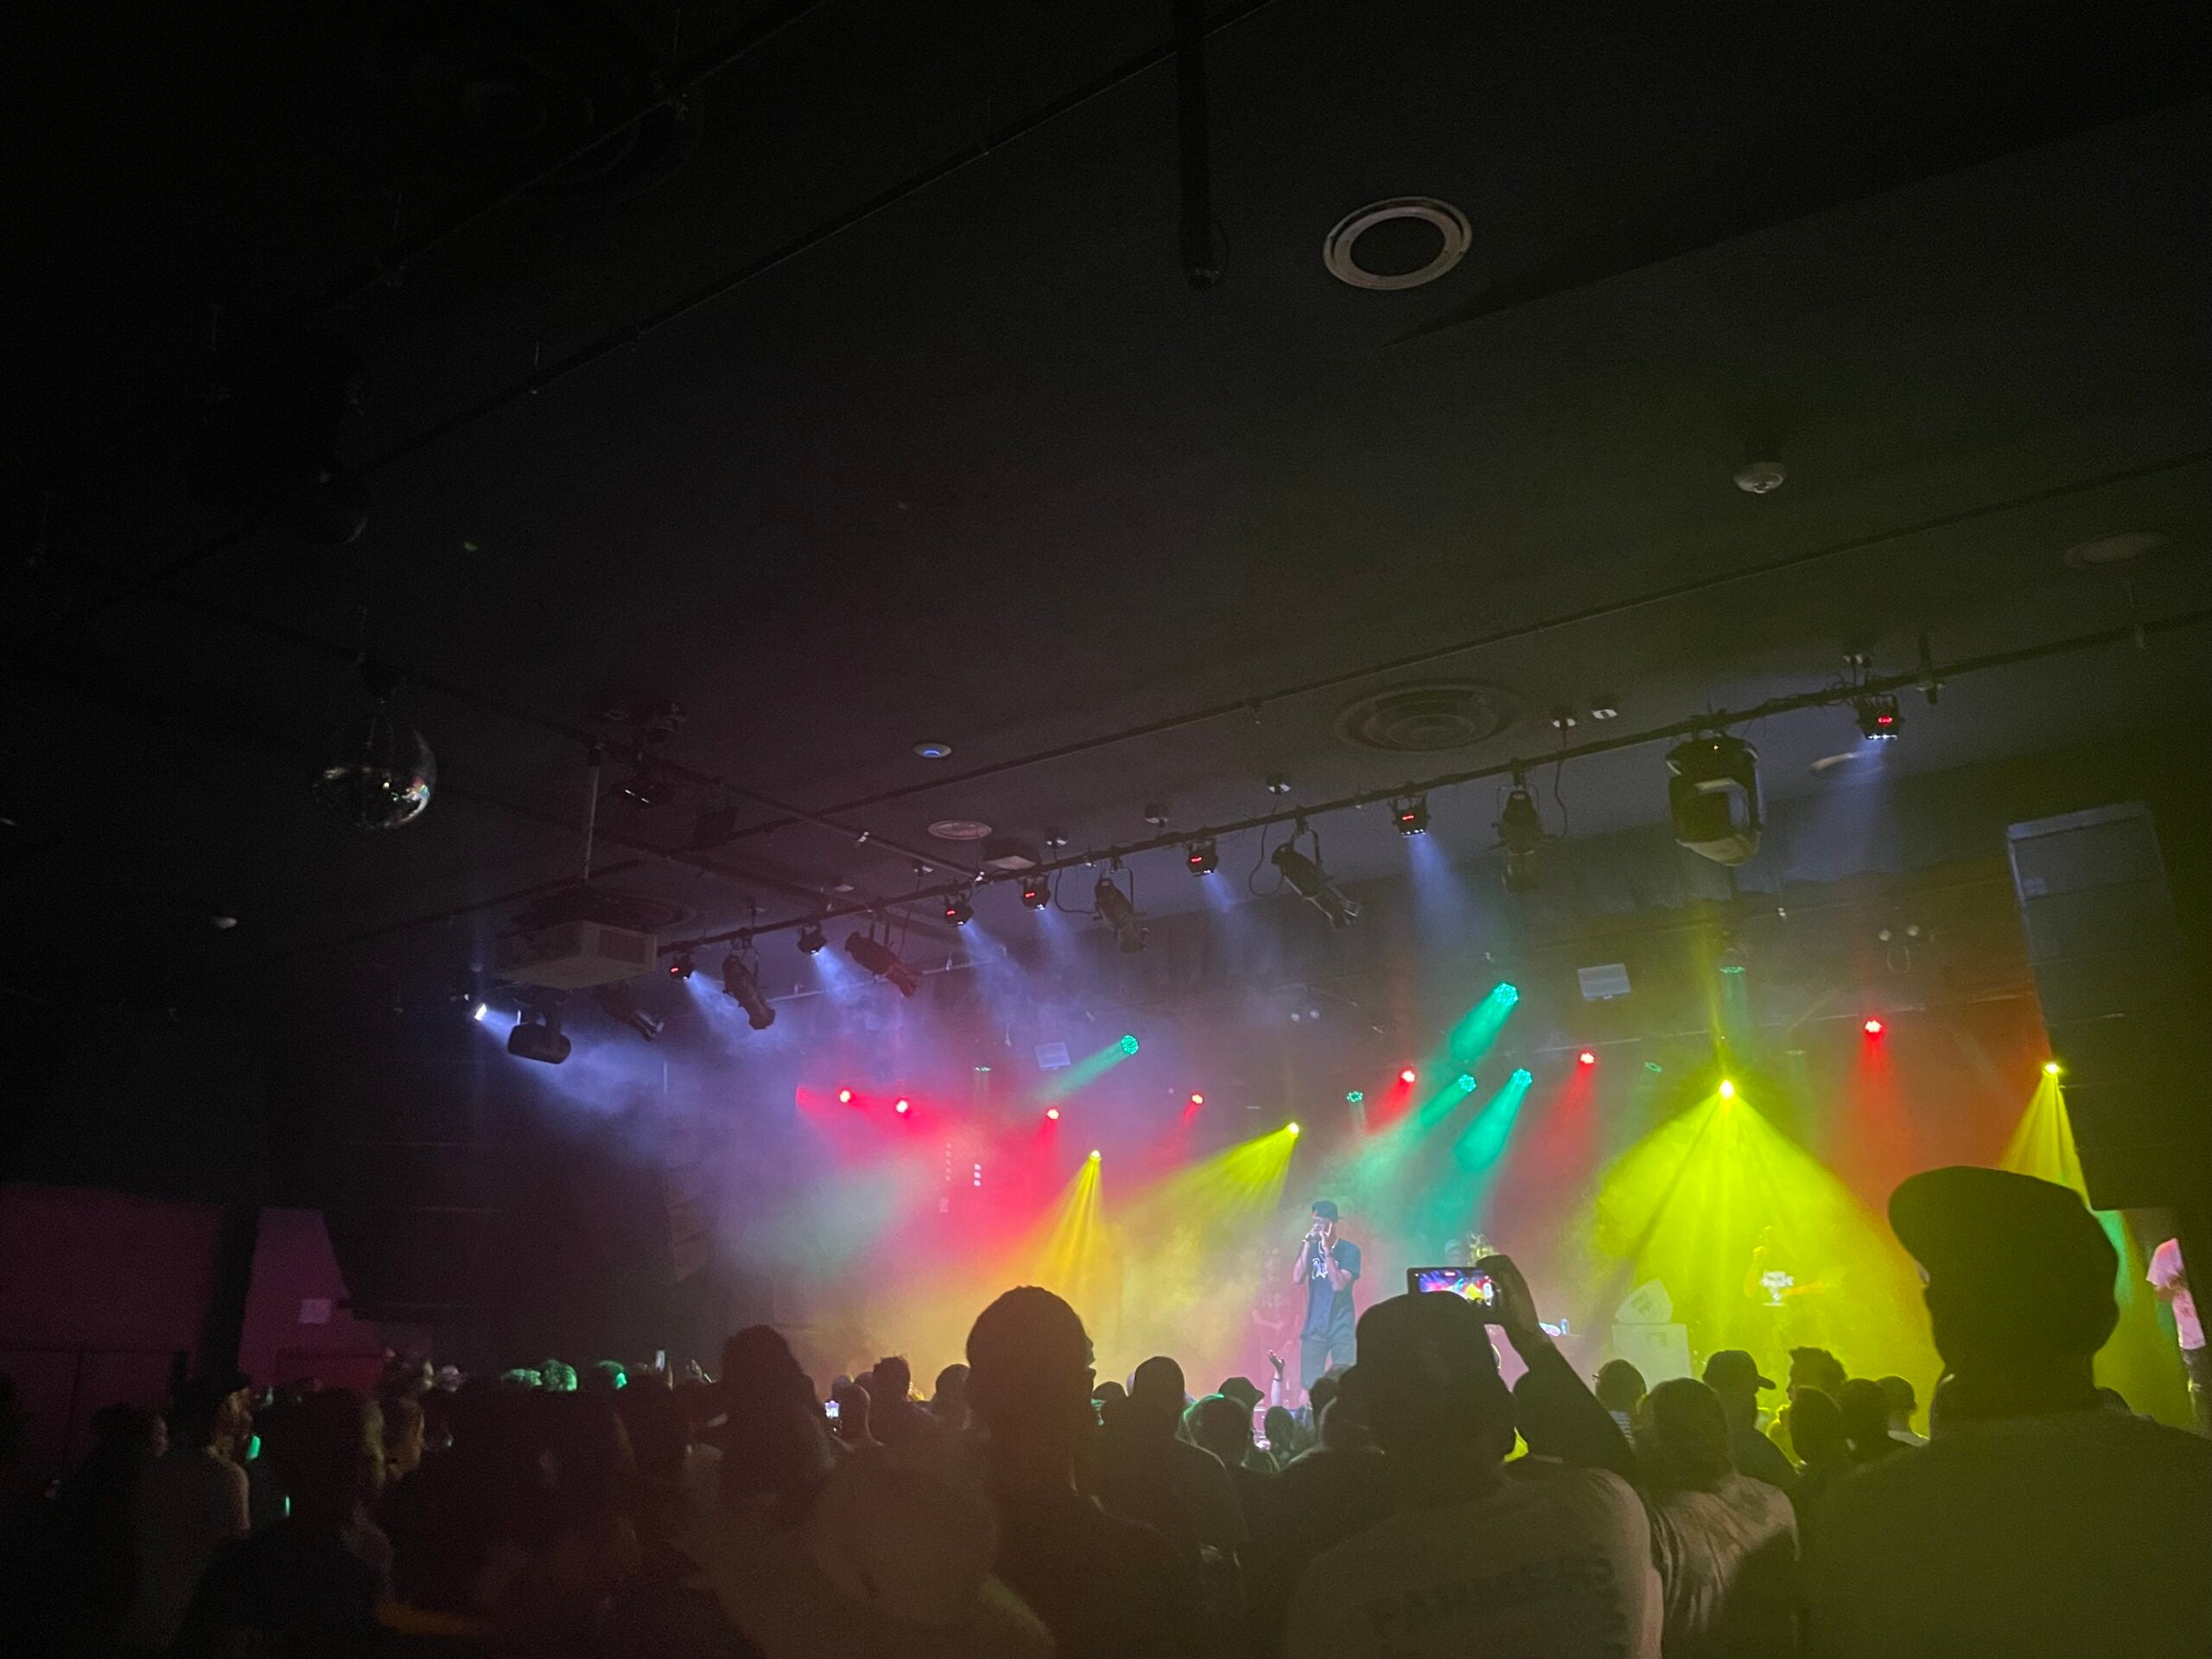 A concert with lots of colorful lights